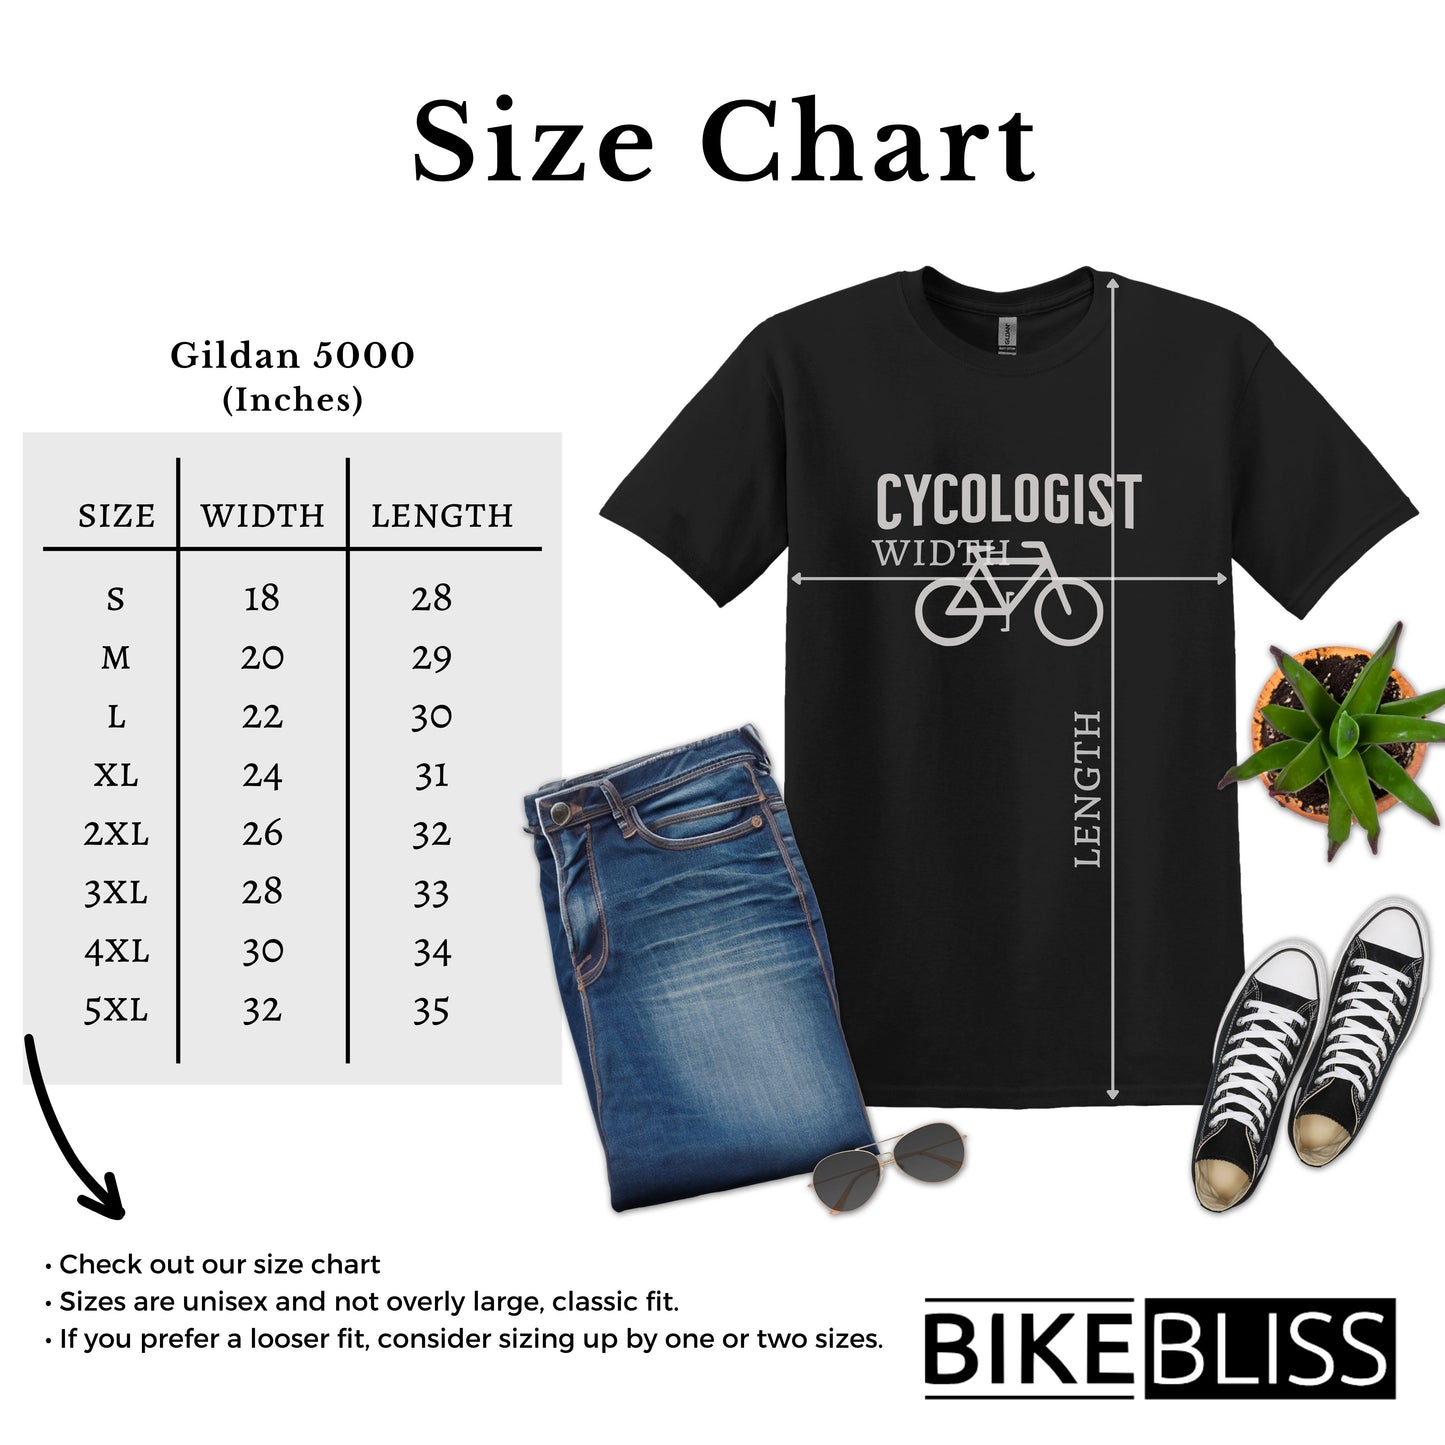 Bike Bliss Cycologist and Bike T-Shirt for Men Size Chart